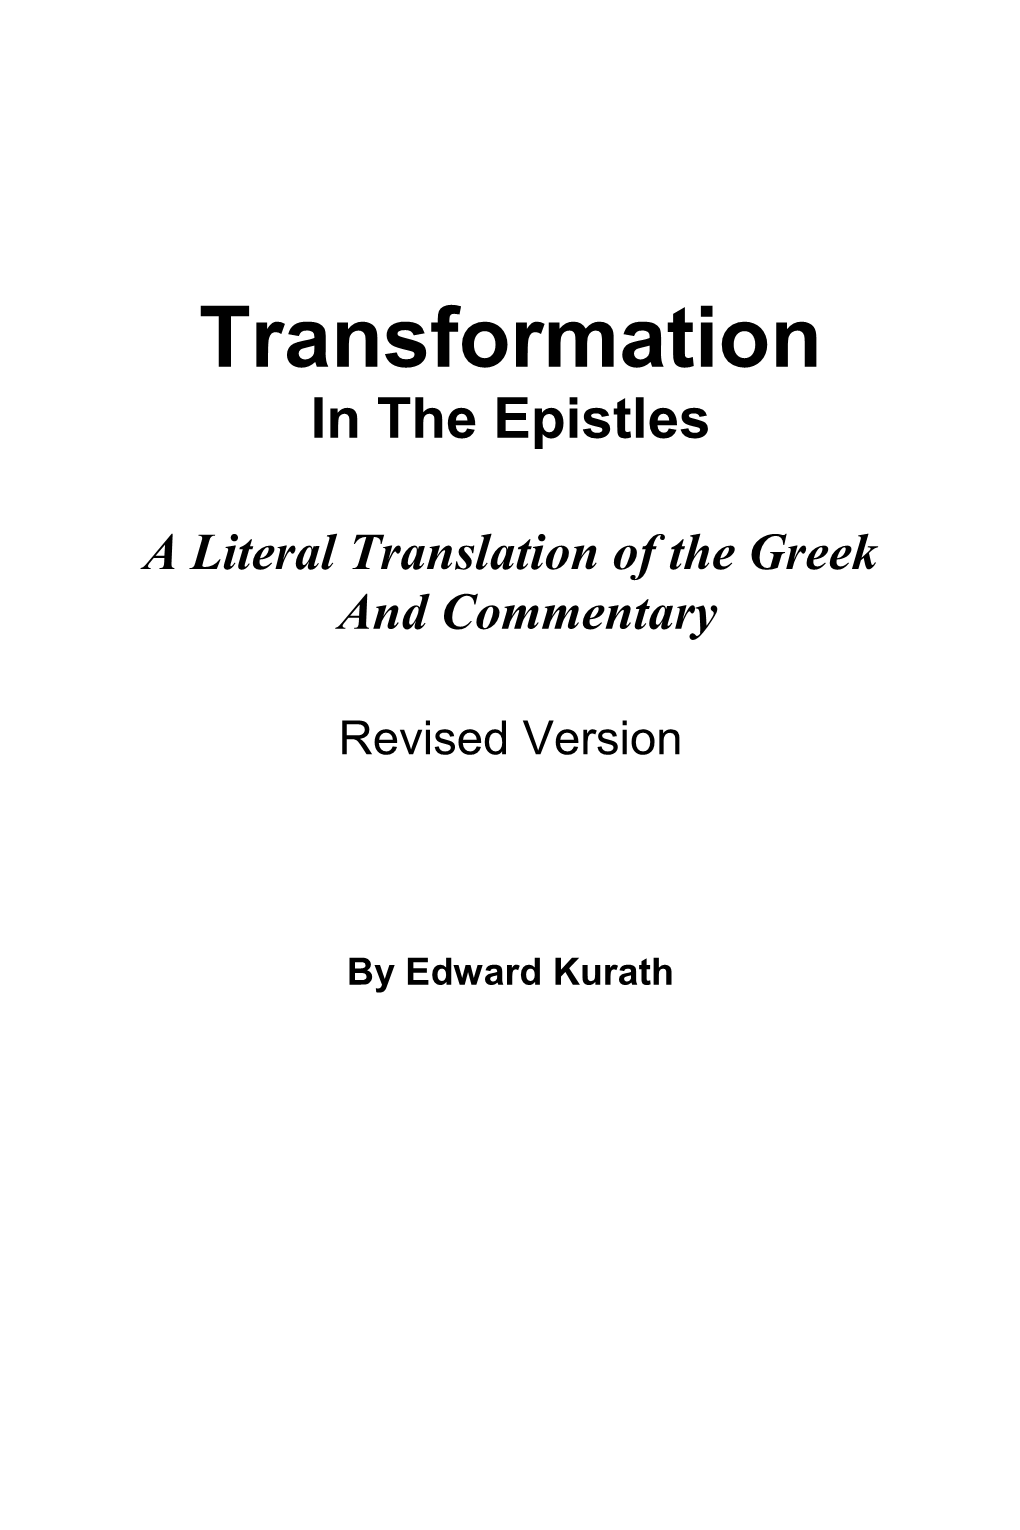 Transformation in the Epistles